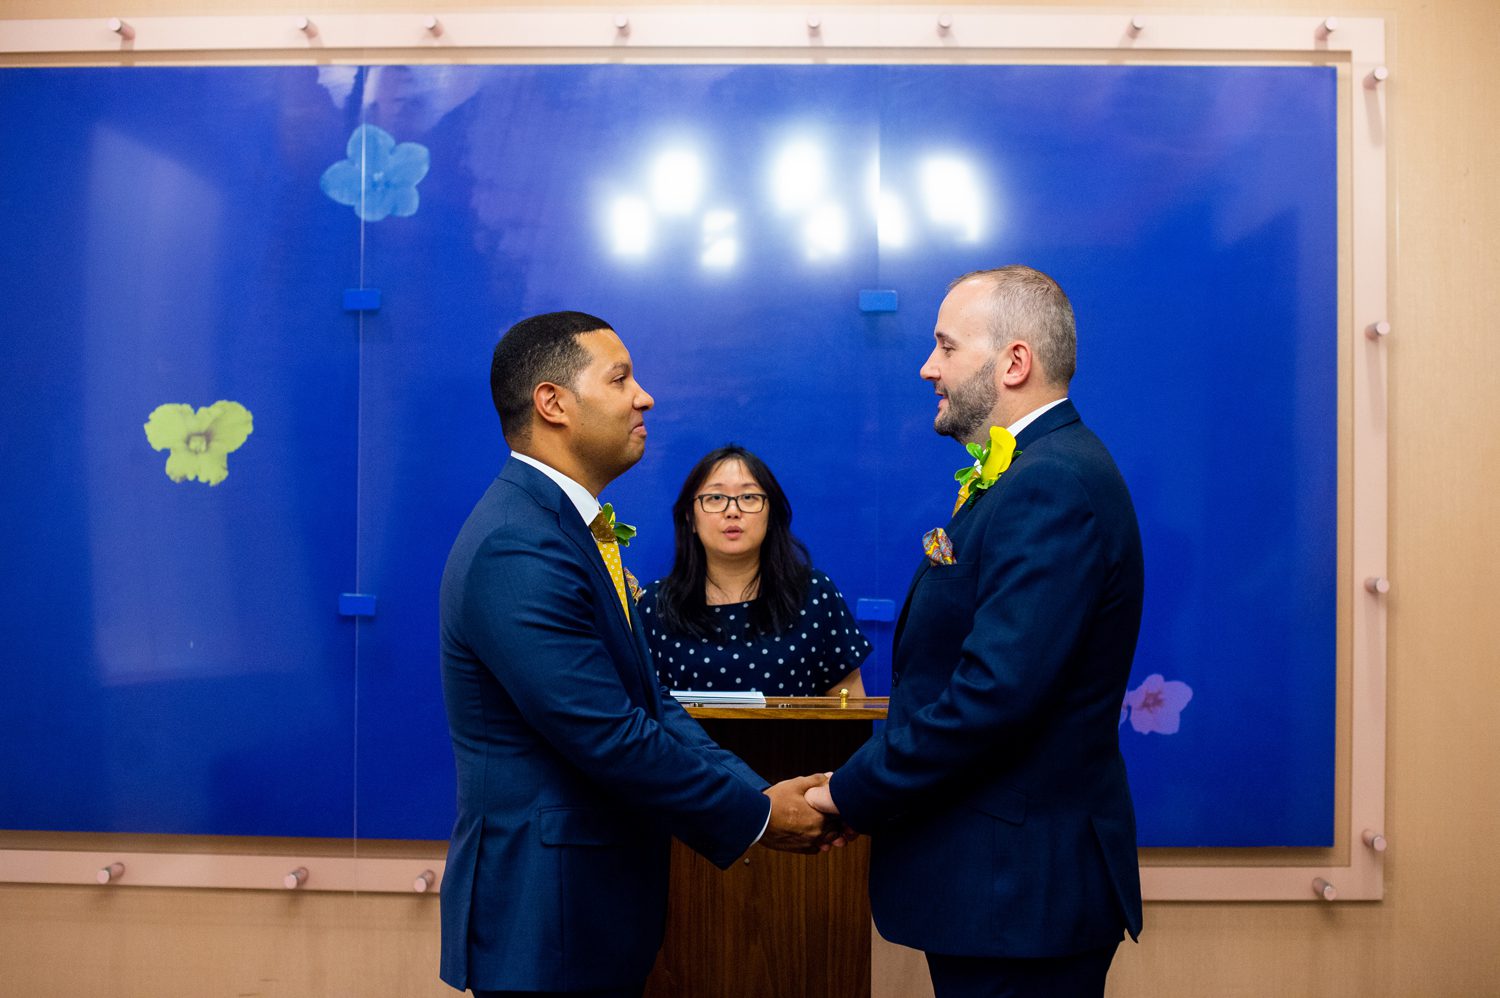 City Hall Wedding with Two Grooms